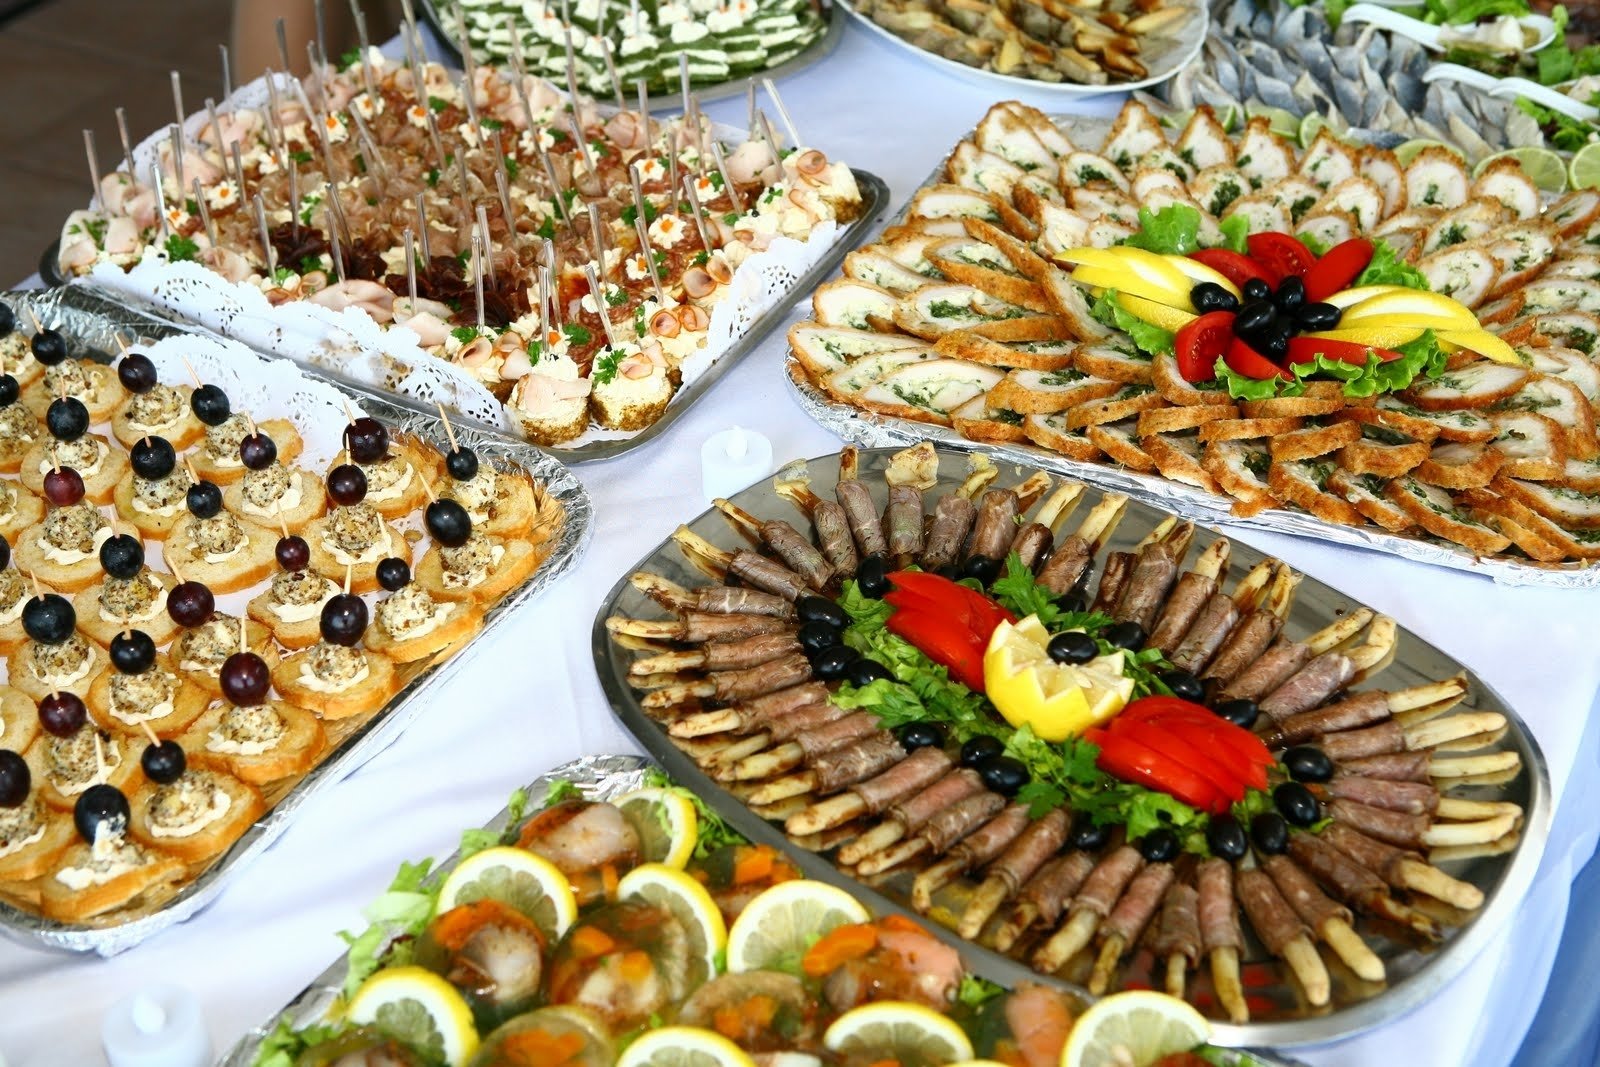 10 Lovely Party Food Ideas For Adults Finger Food finger foods for christmas party christmas stuff diy decorations 5 2022